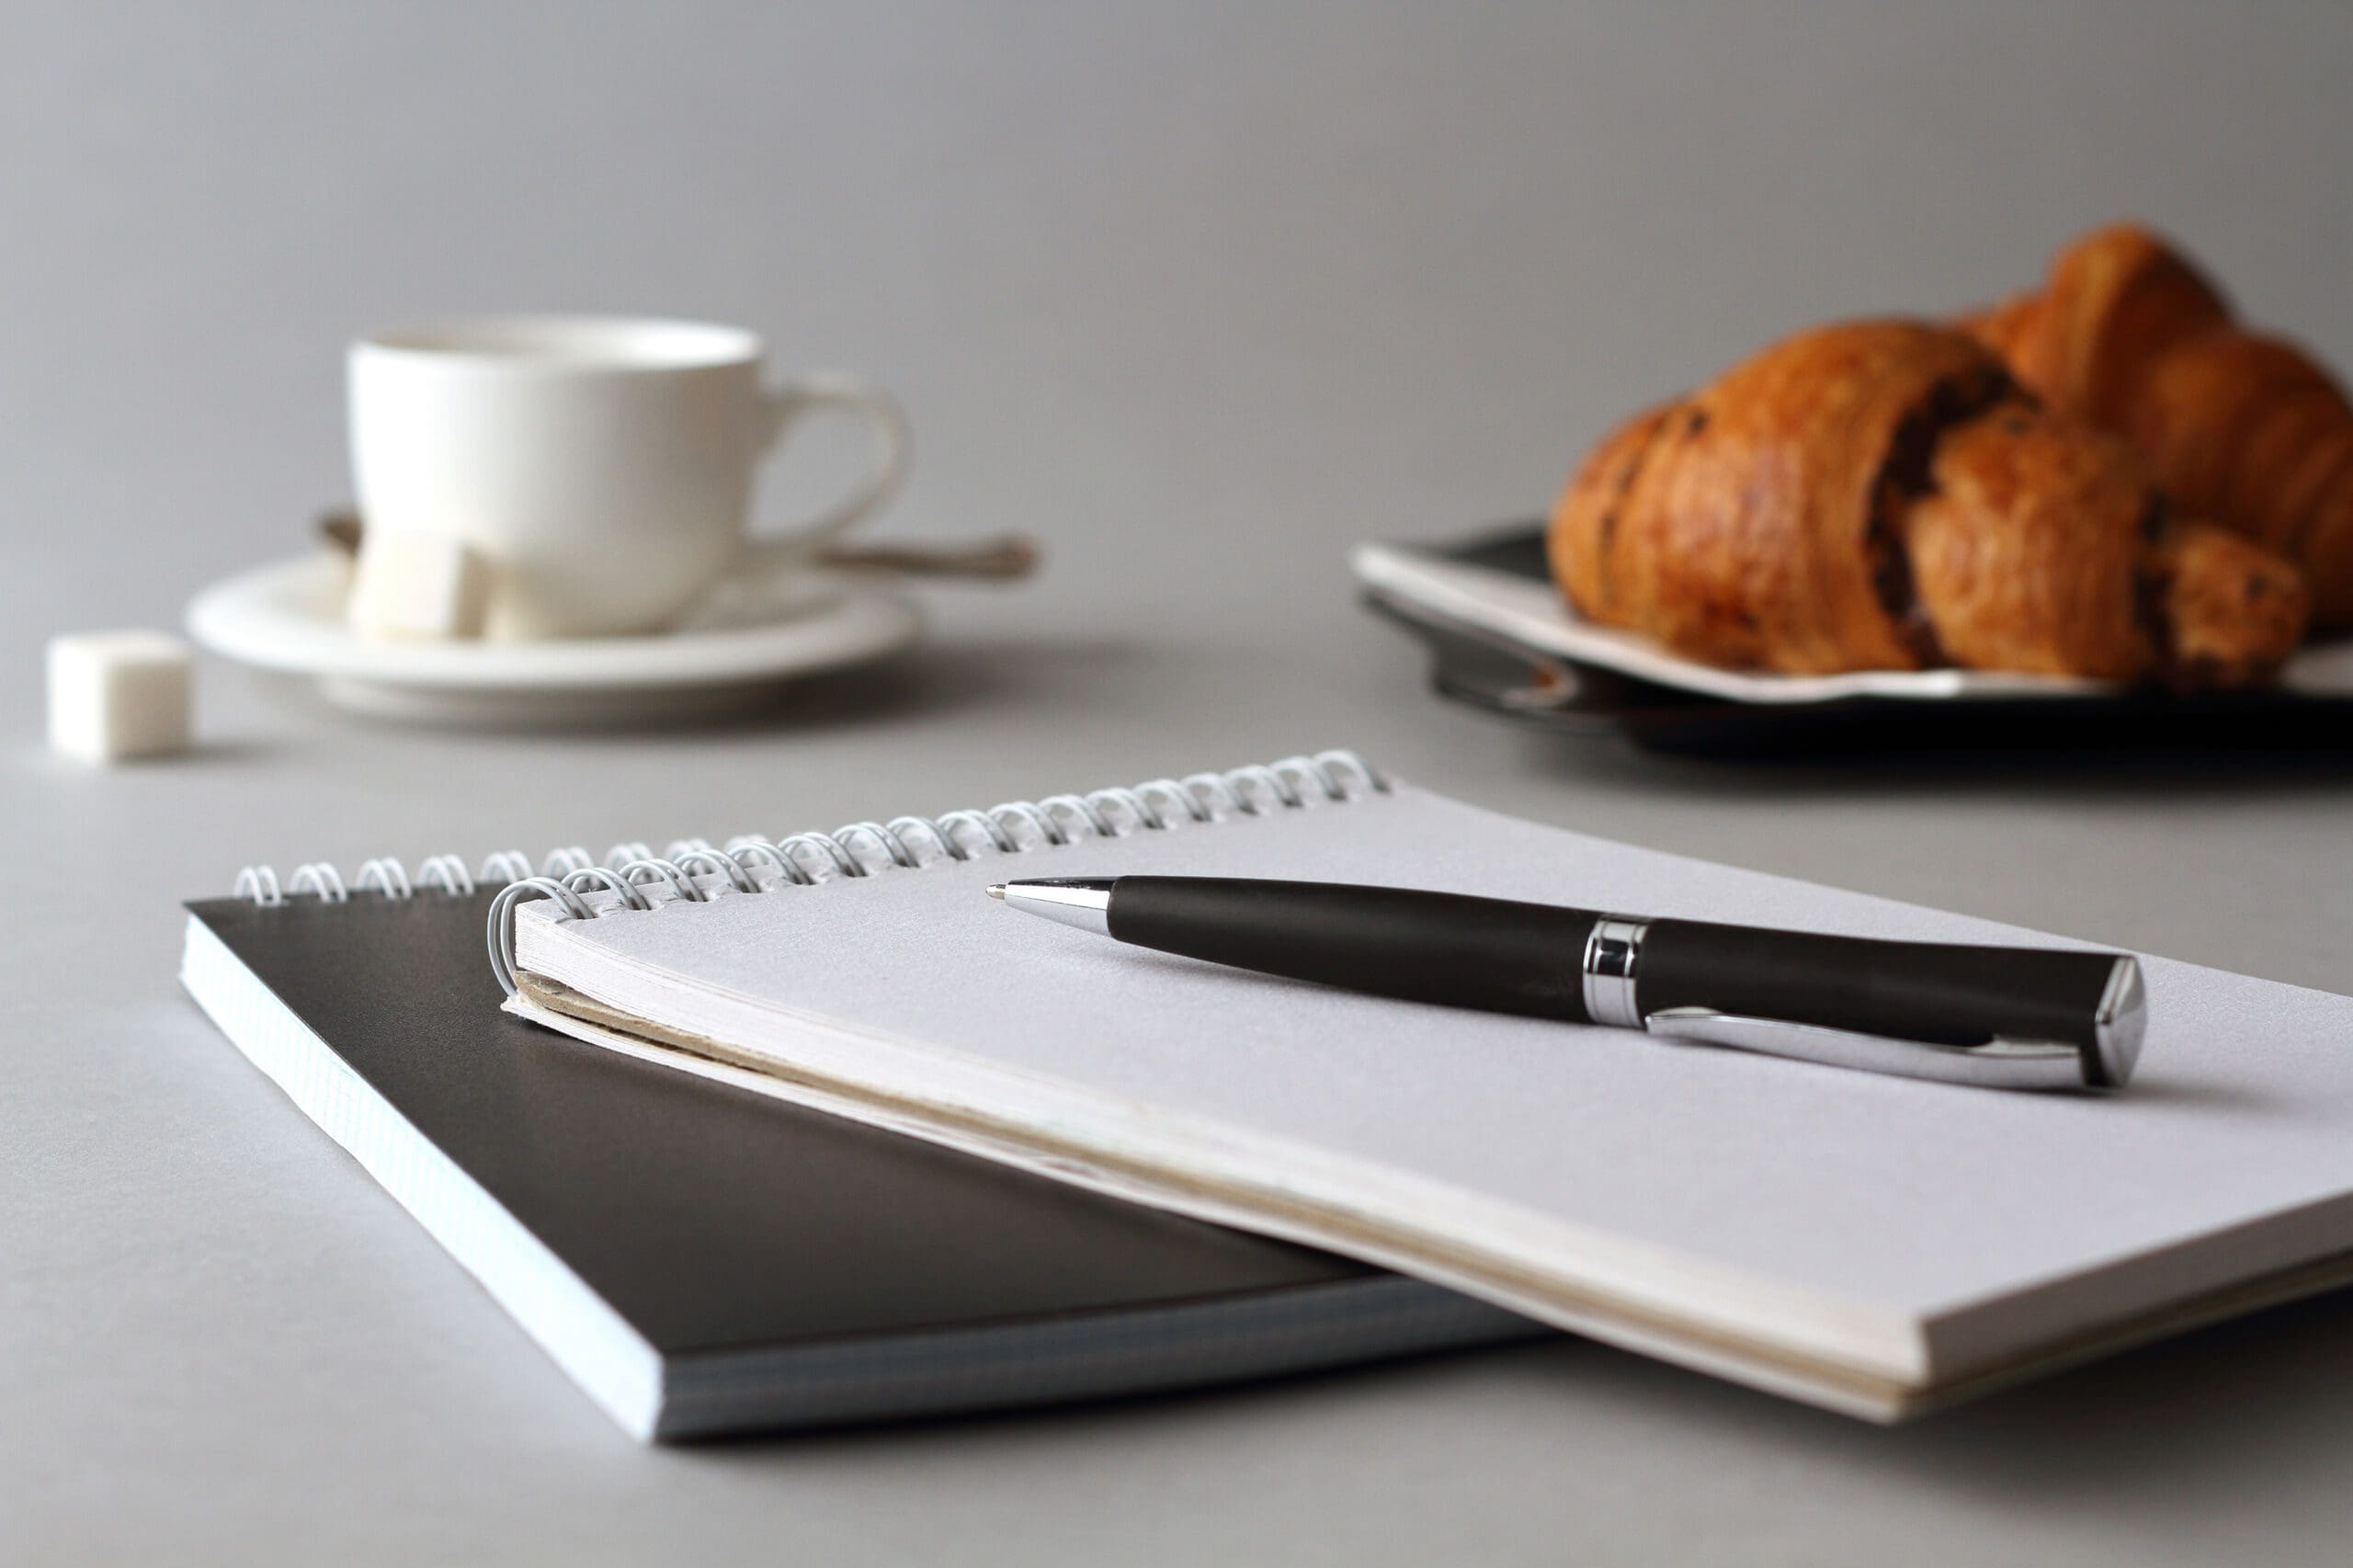 A notebook with a pen, a plate of croissants, and a mug of coffee